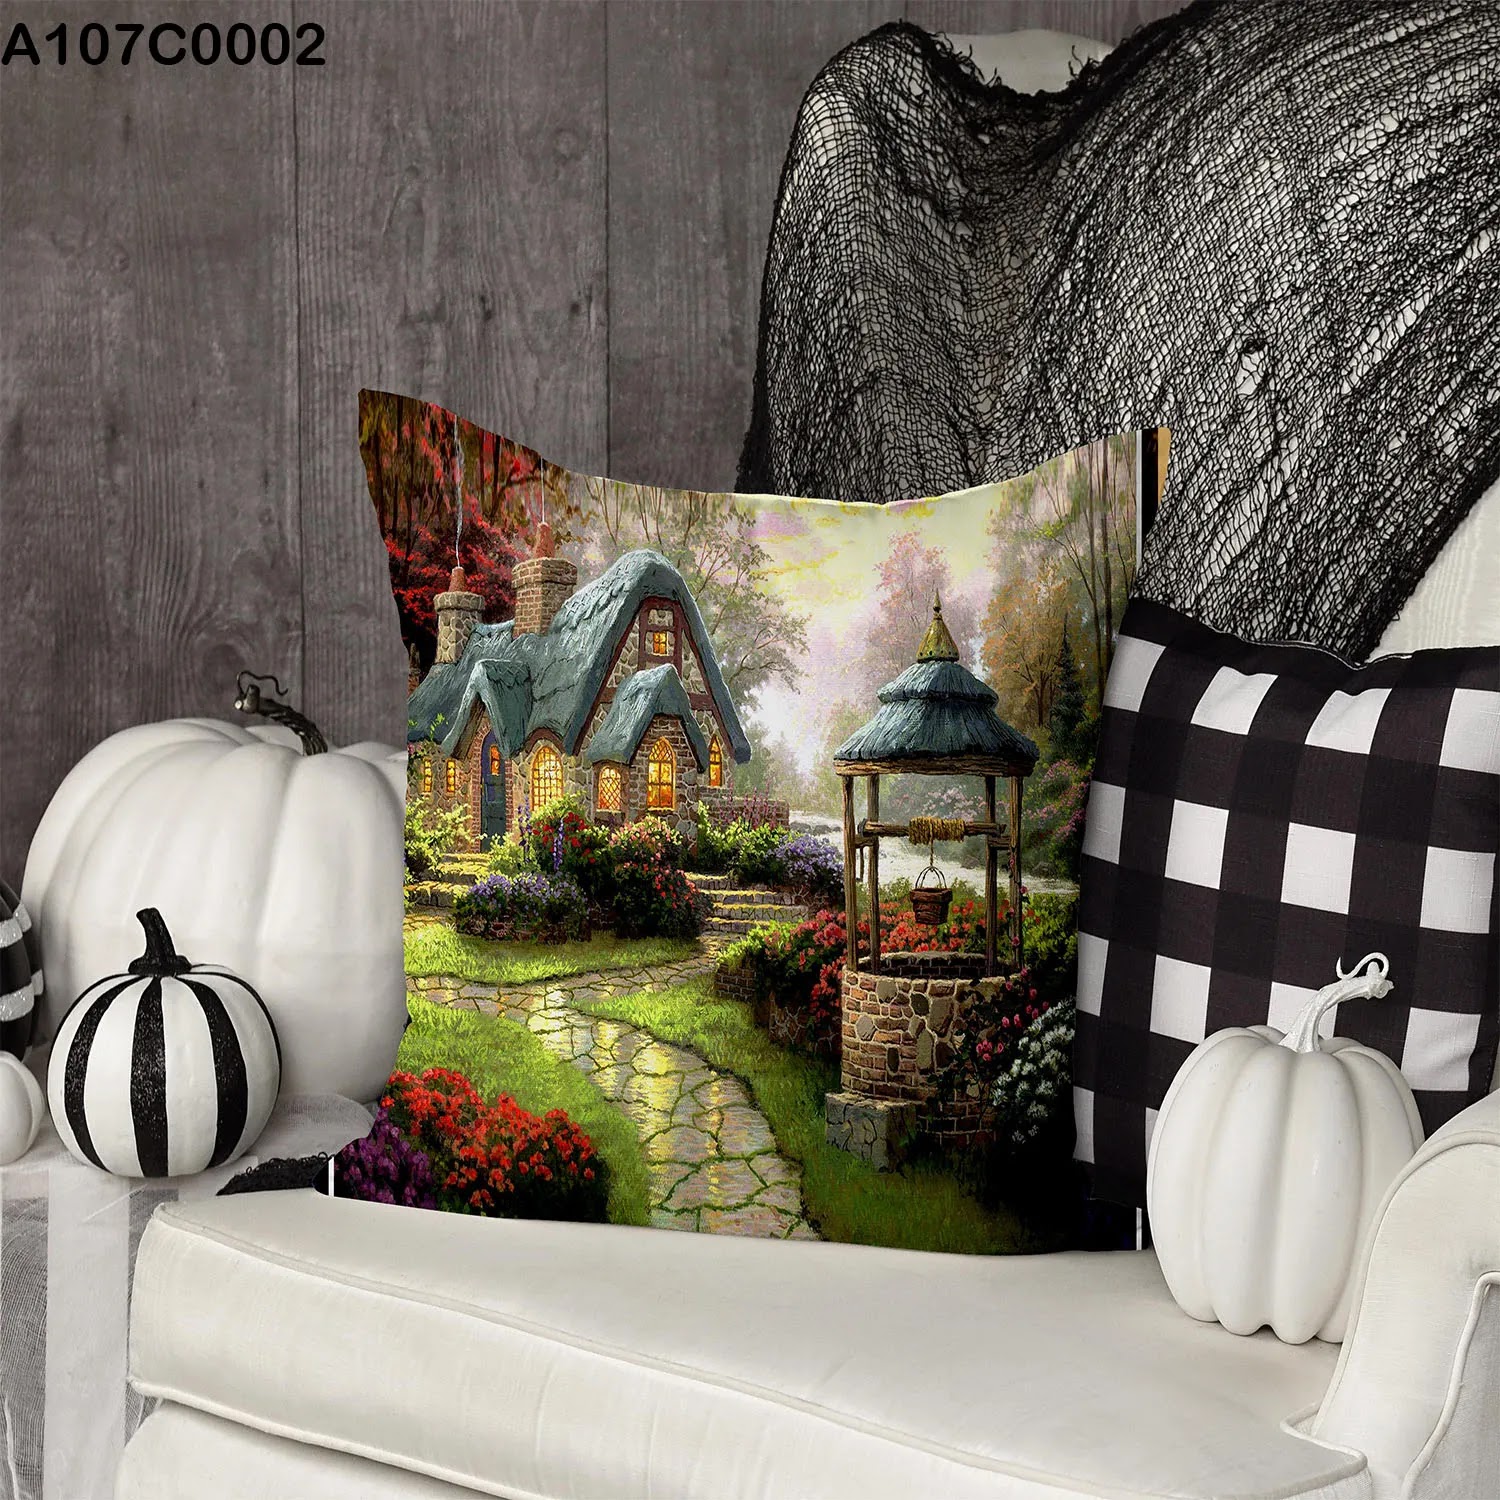 Pillow case with cottage and garden